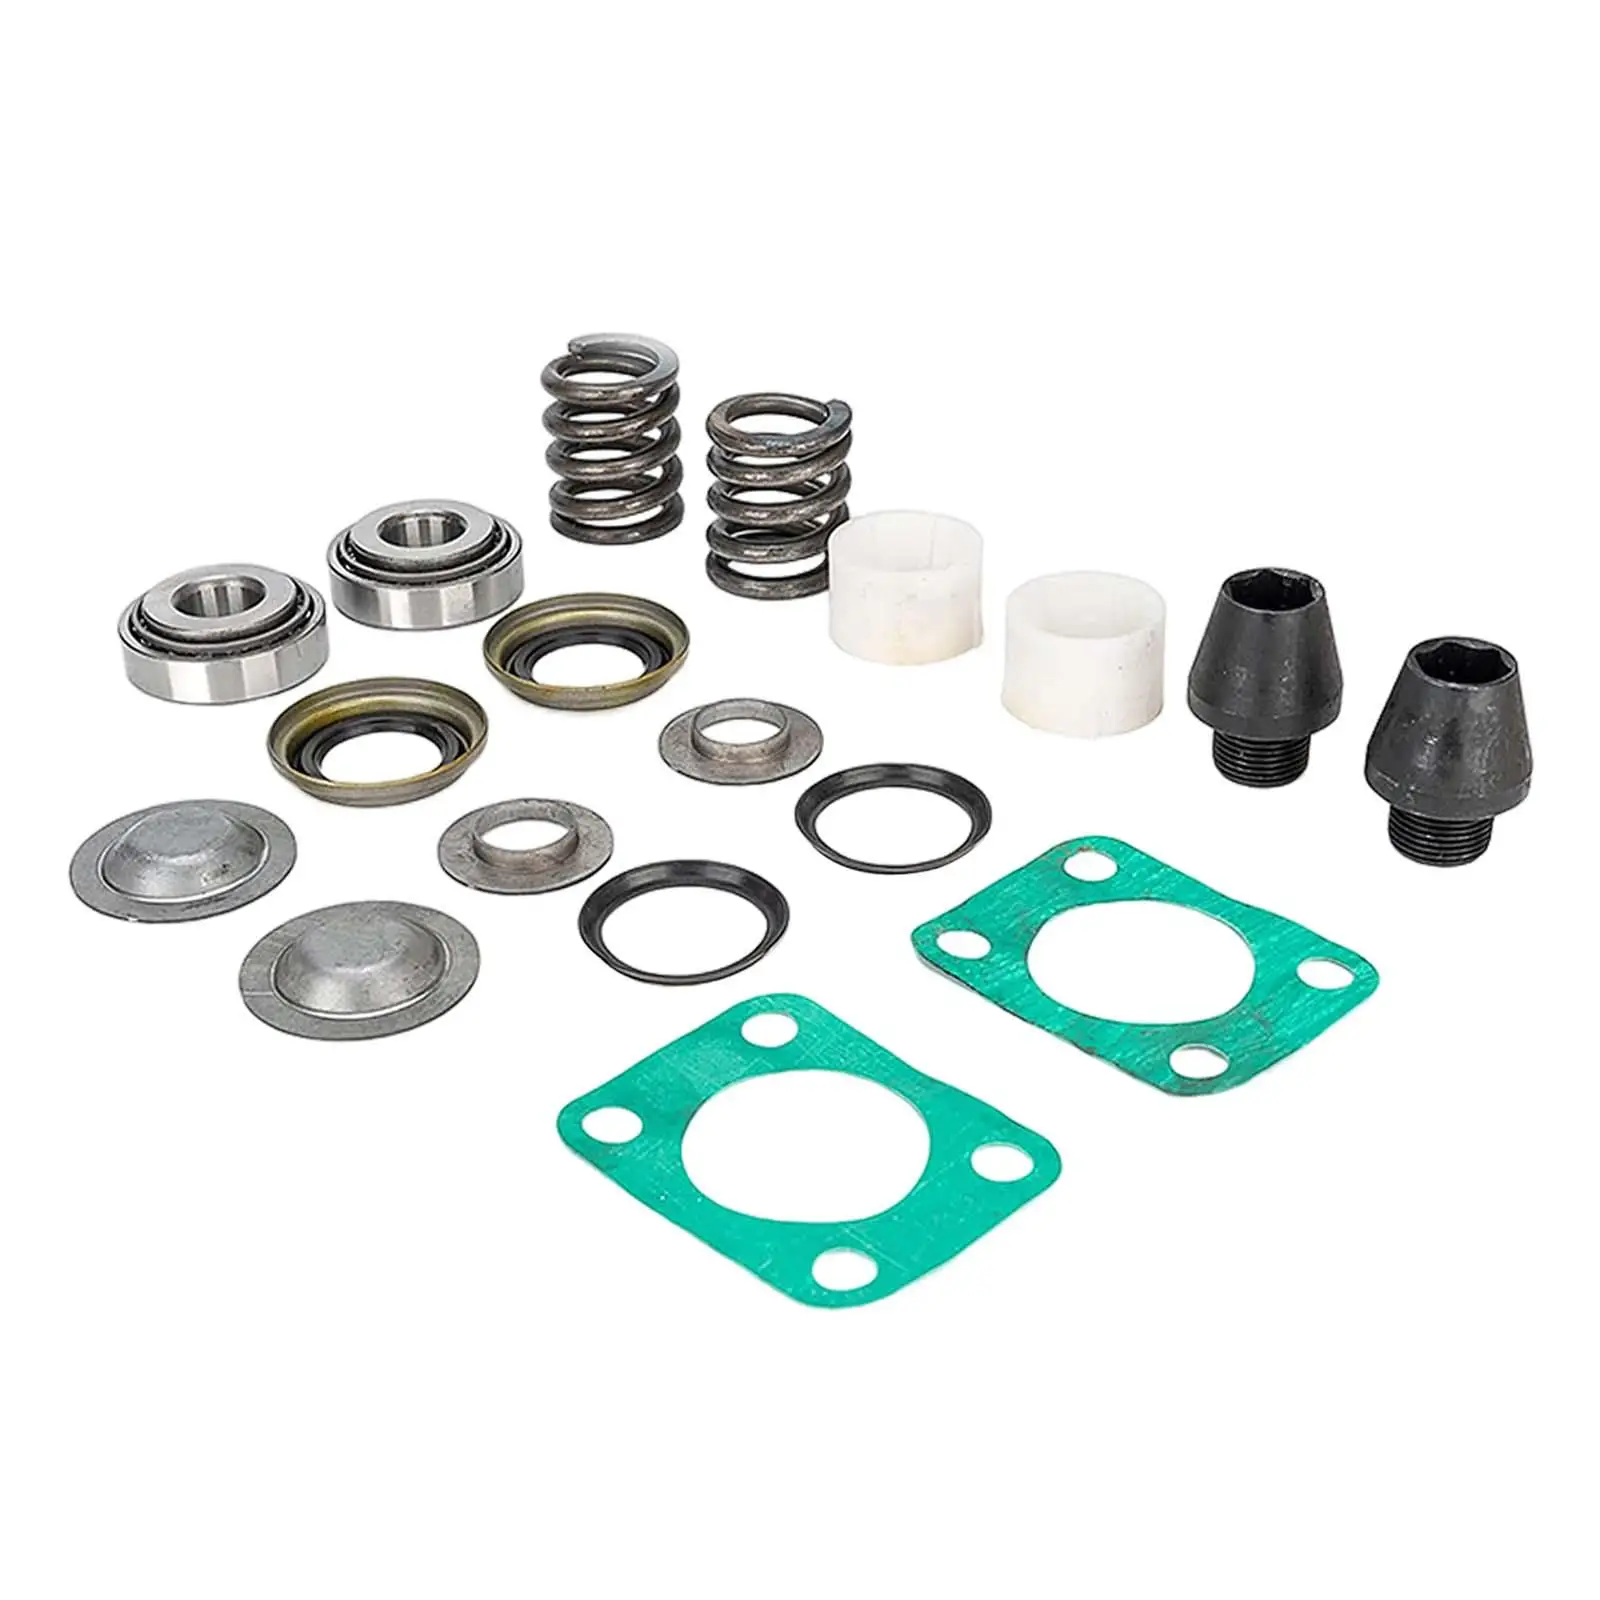 Kingpin Bearing Seal Rebuild Kit 706395x Replacement 41886 620180 37307 for Ford Dana 60 Accessories High Performance